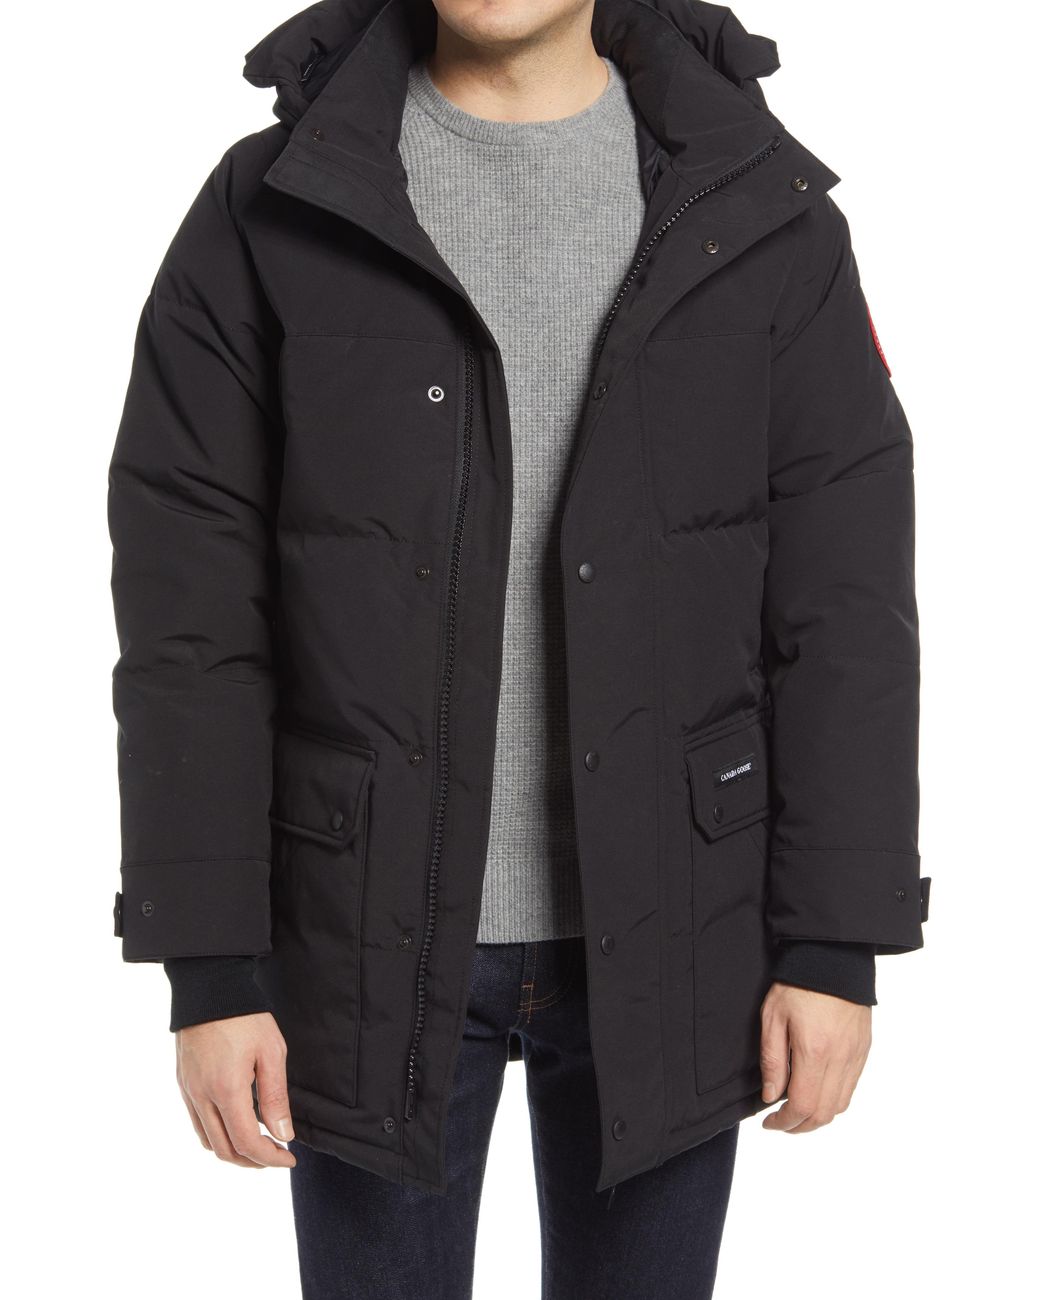 Canada Goose Emory 625 Fill Power Down Parka in Black for Men - Lyst